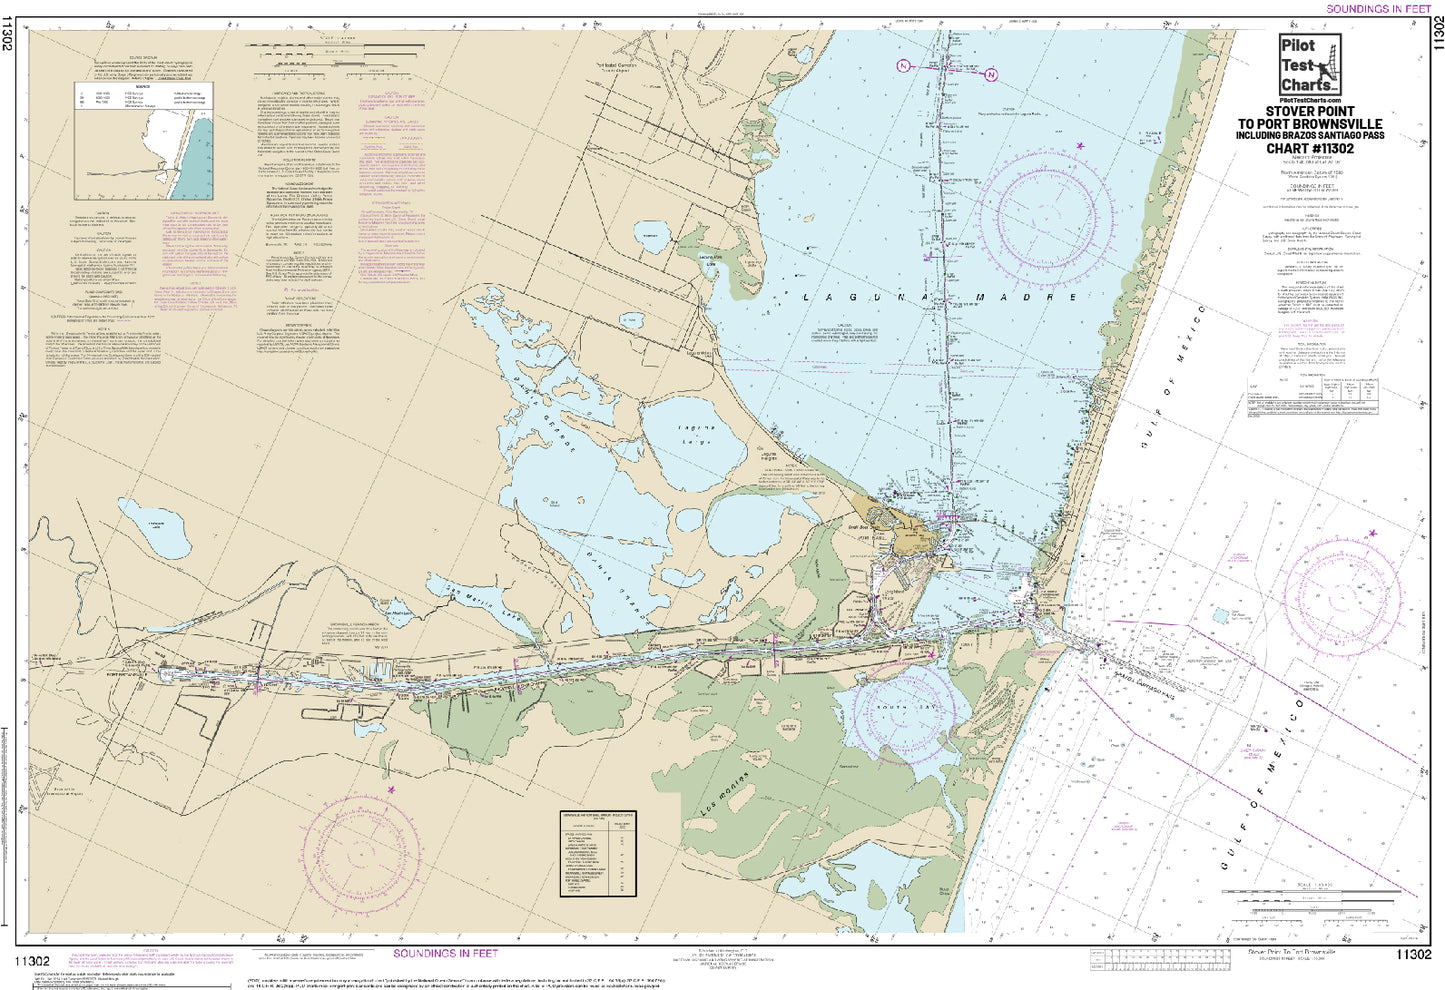 #11302 Stover Point to Port Brownsville, Texas Chart